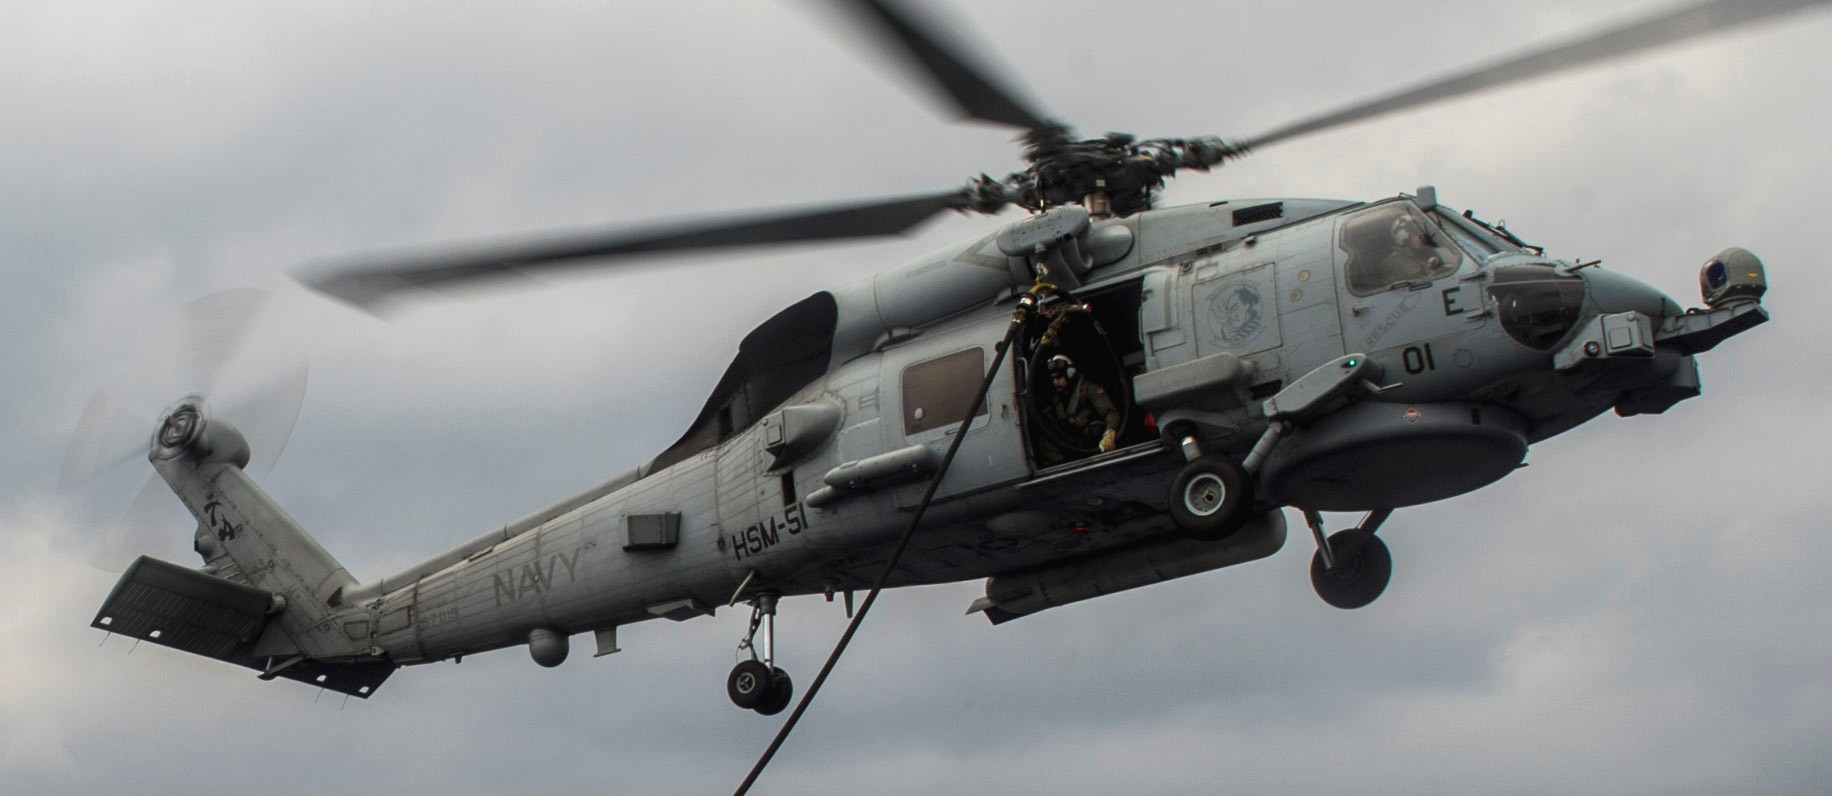 hsm-51 warlords helicopter maritime strike squadron mh-60r seahawk navy 2015 13